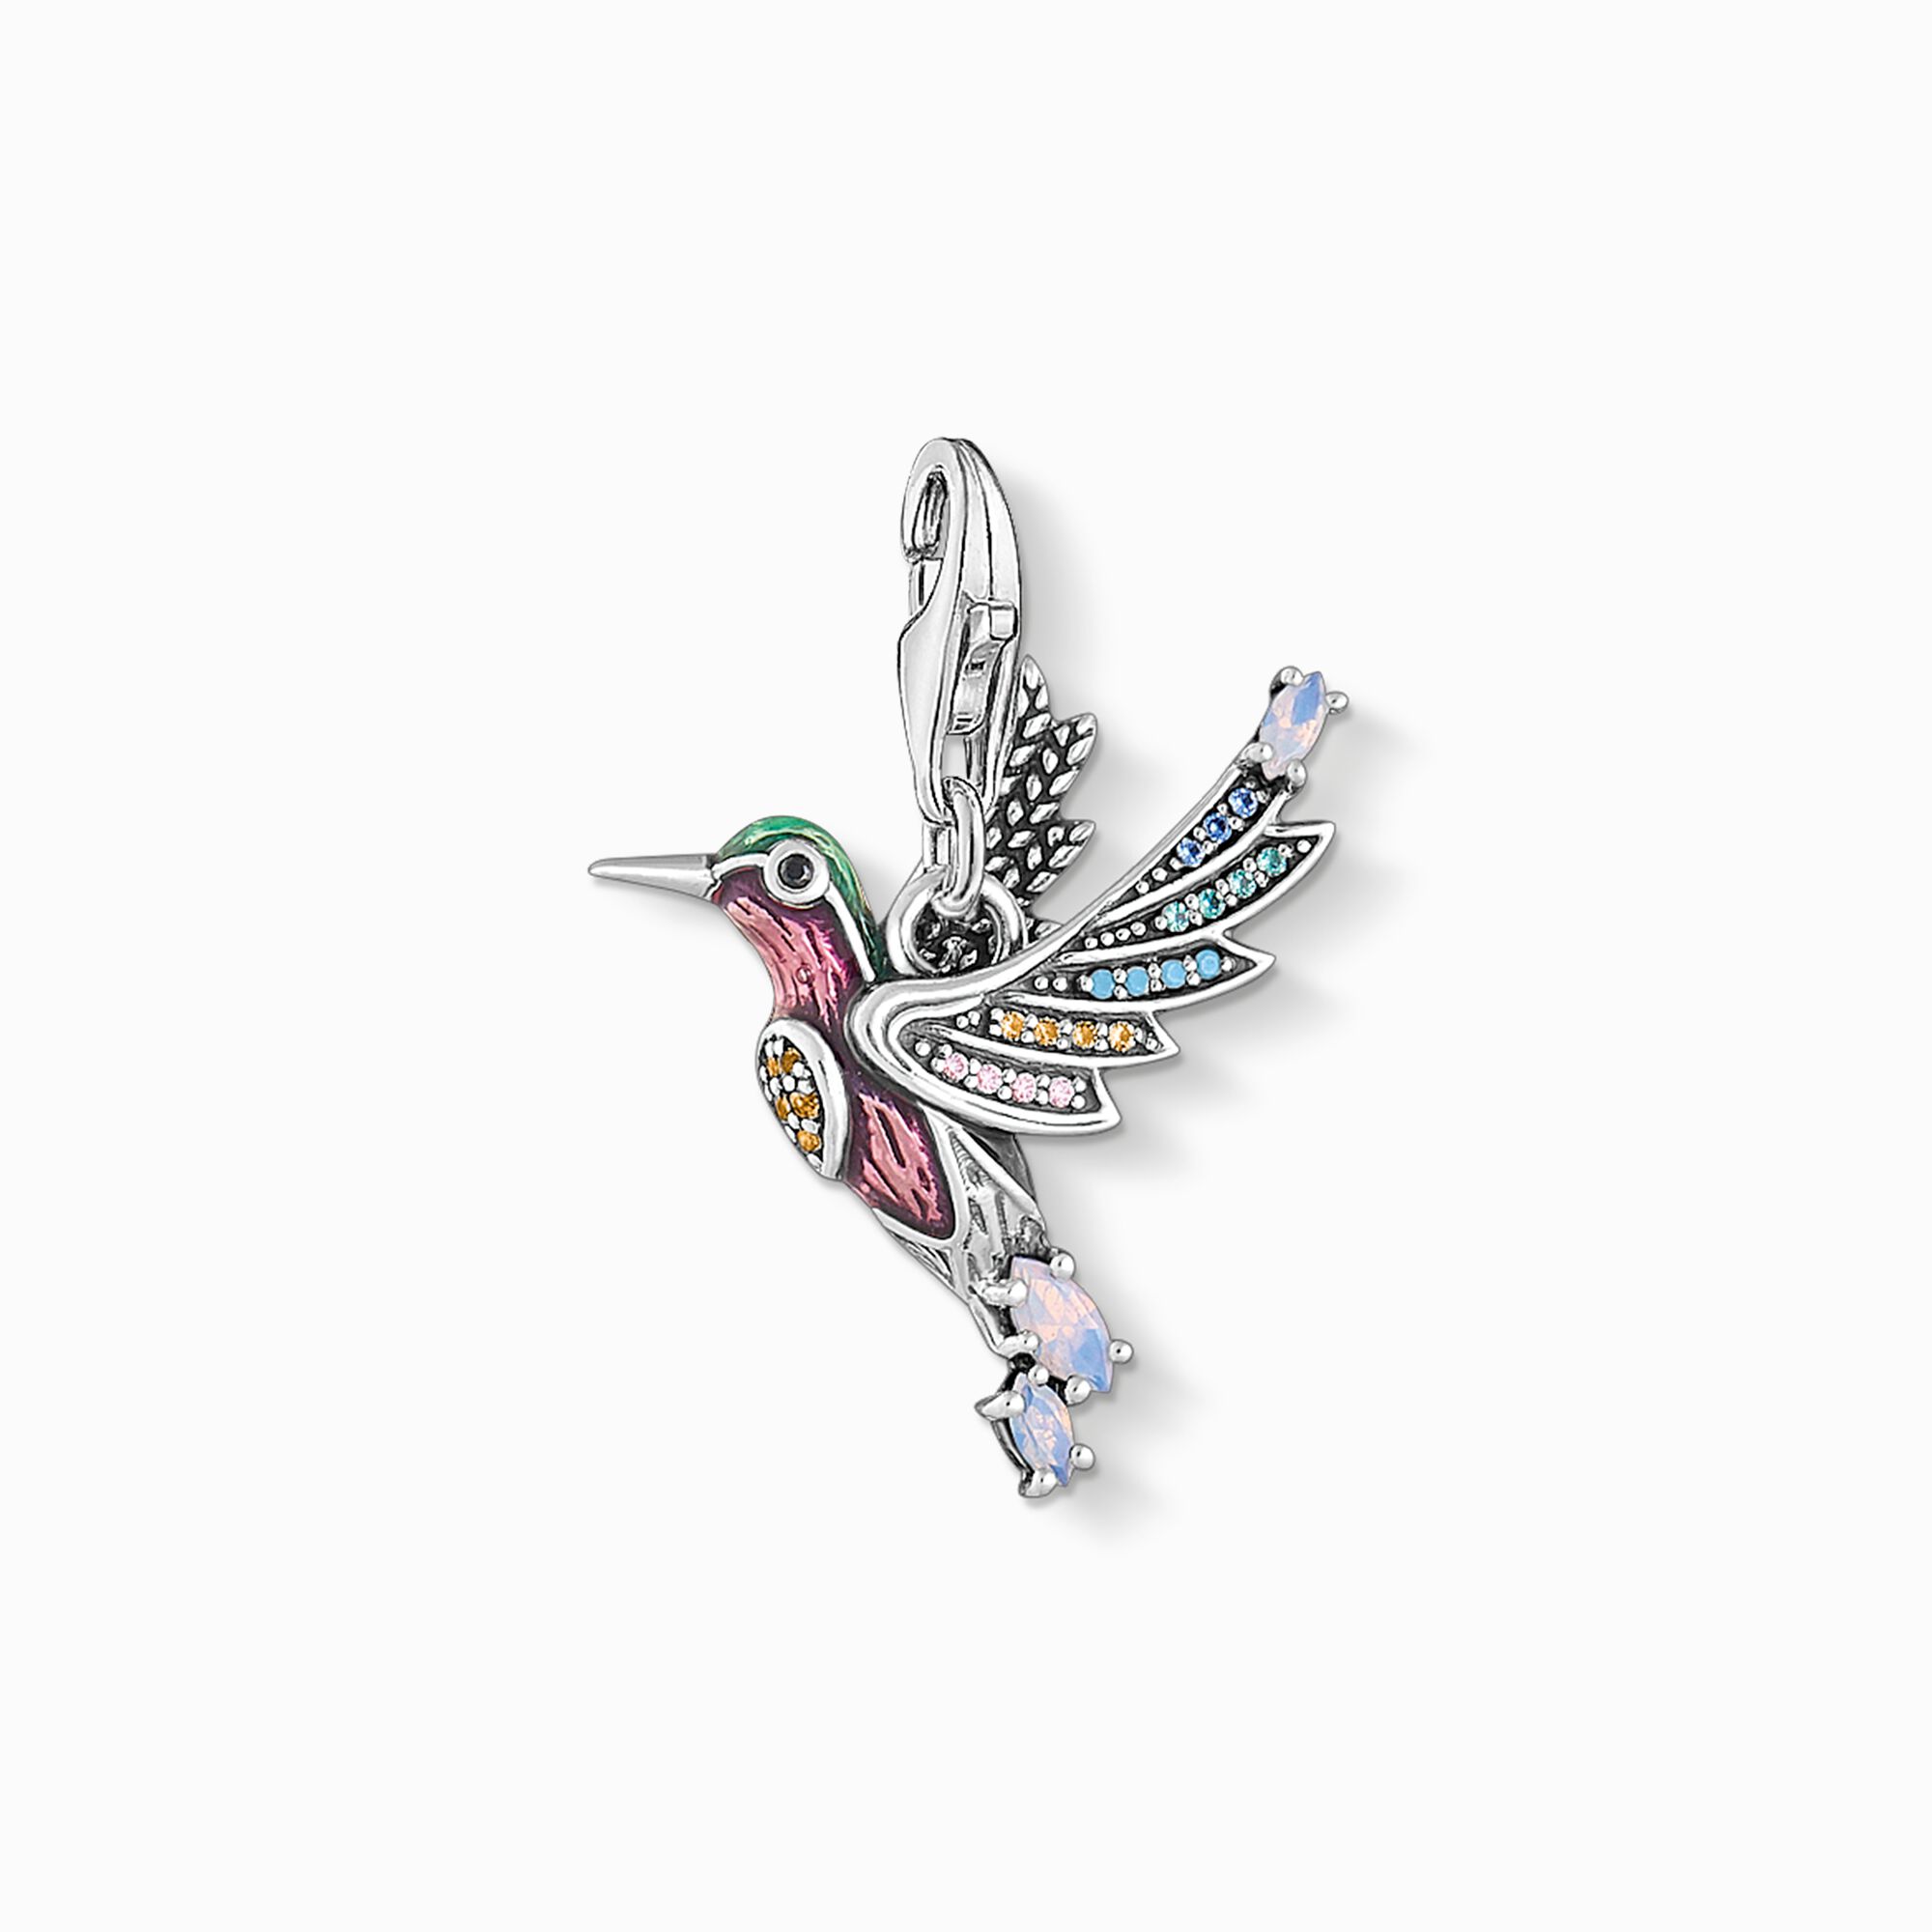 charm pendant hummingbird silver from the Charm Club collection in the THOMAS SABO online store